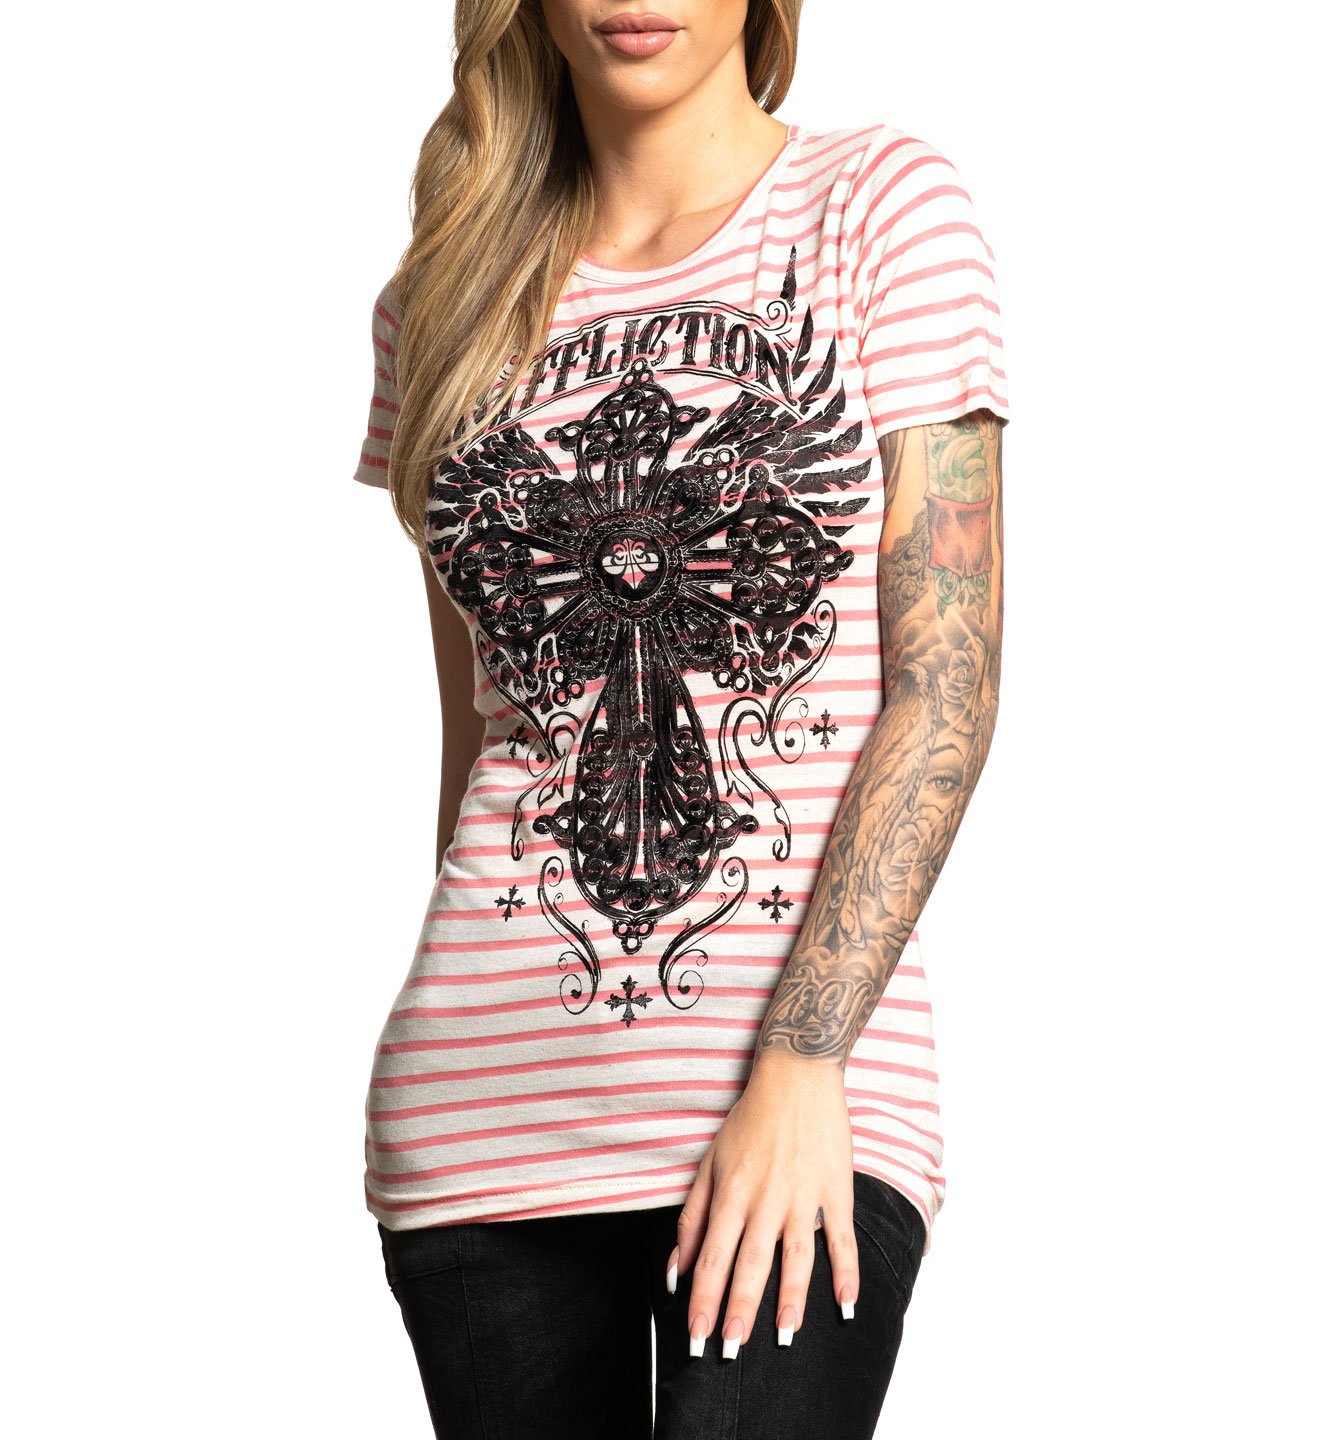 Westchester - Womens Short Sleeve Tees - Affliction Clothing